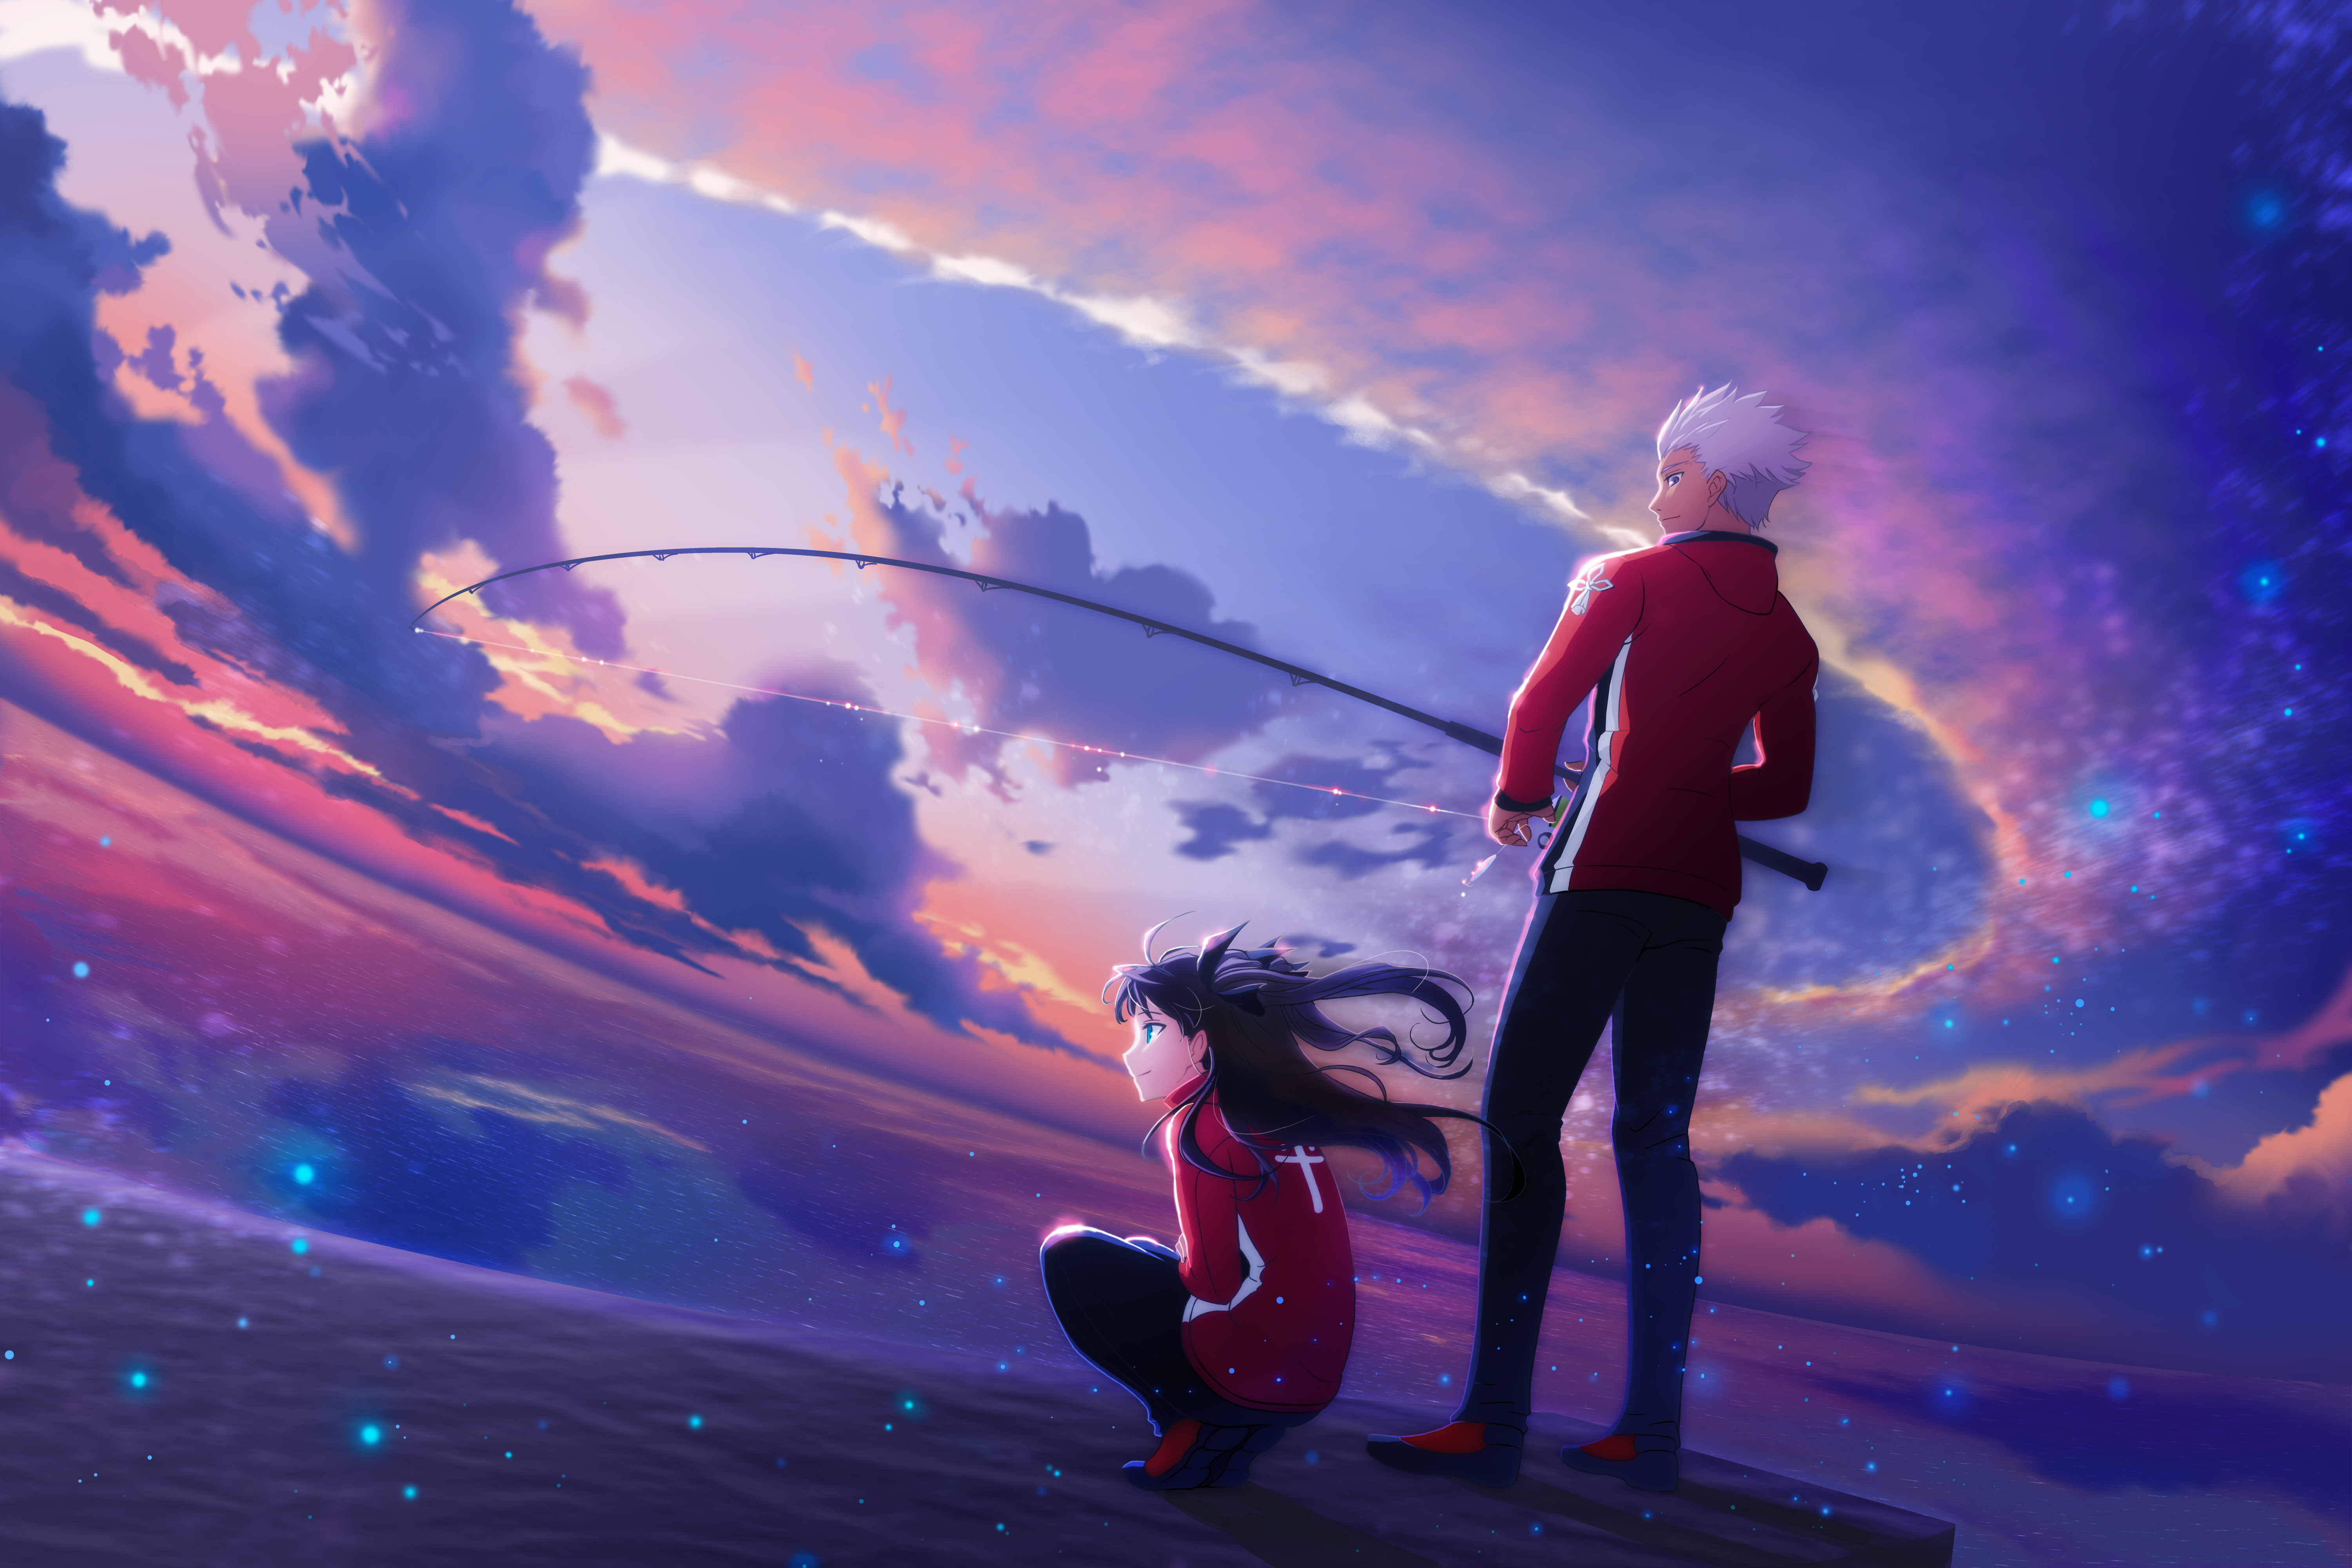 Anime 6000x4000 Fate series Fate/Stay Night Fate/Stay Night: Unlimited Blade Works anime girls anime boys alternate costume 2D black pants black ribbons twintails fishing rod rear view ocean view looking away clouds smiling blue eyes Tohsaka Rin Archer (Fate/Stay Night) long hair black hair white hair short hair bangs hair in face fan art anime red jackets hair blowing in the wind squatting standing sky